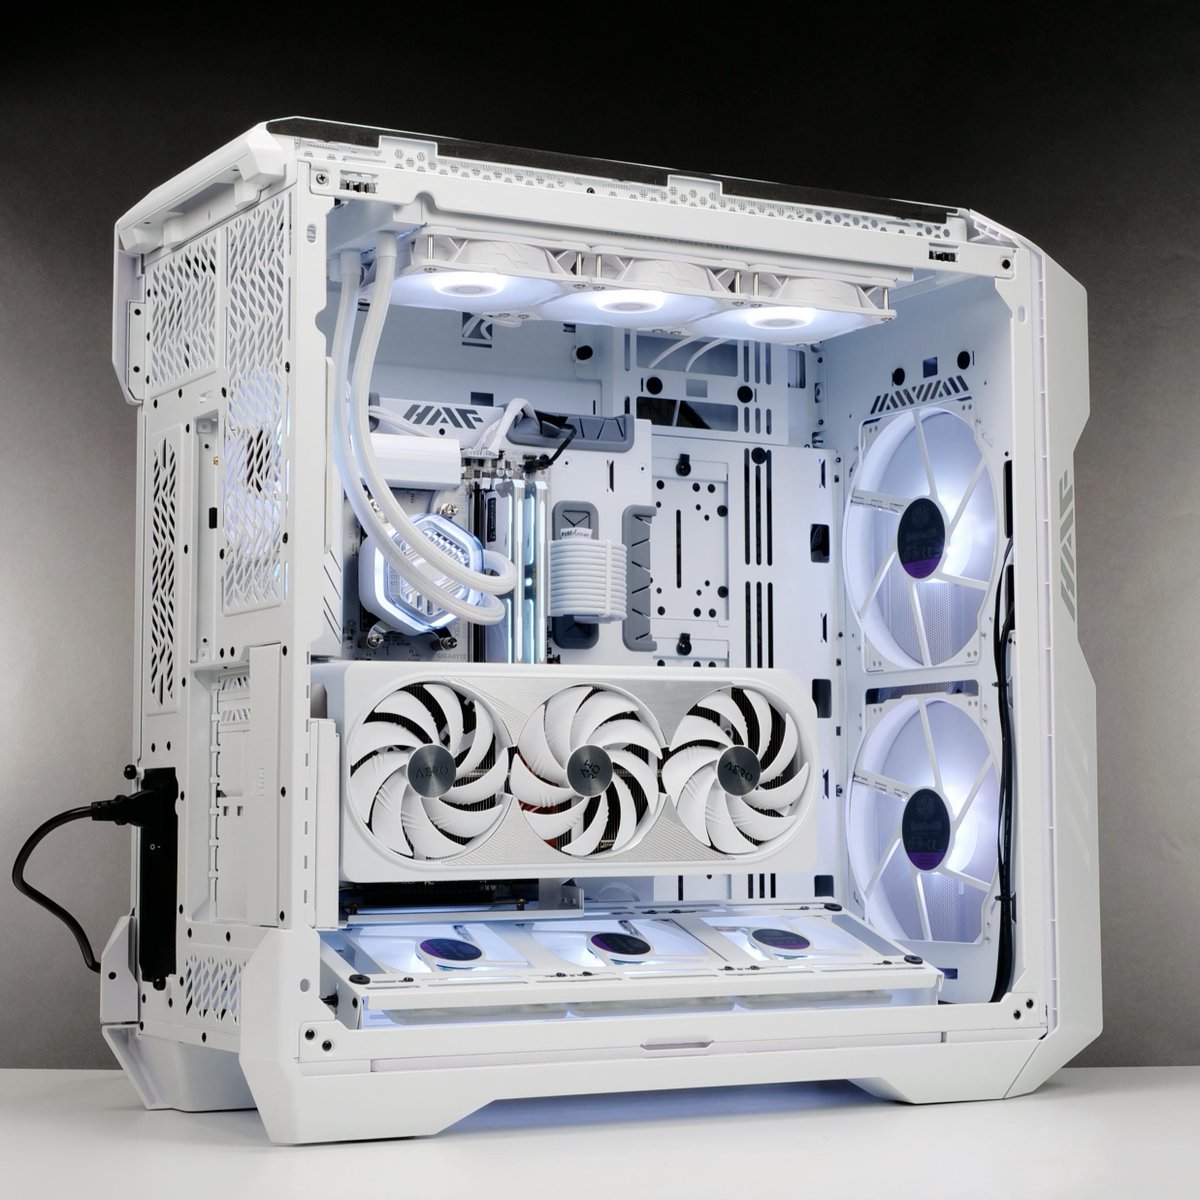 The HAF 700 White is looking mighty fine in its winter shroud. 📸 Battlerigs @battlerigs #pcmr #gamingsetup #pccase #coolermaster